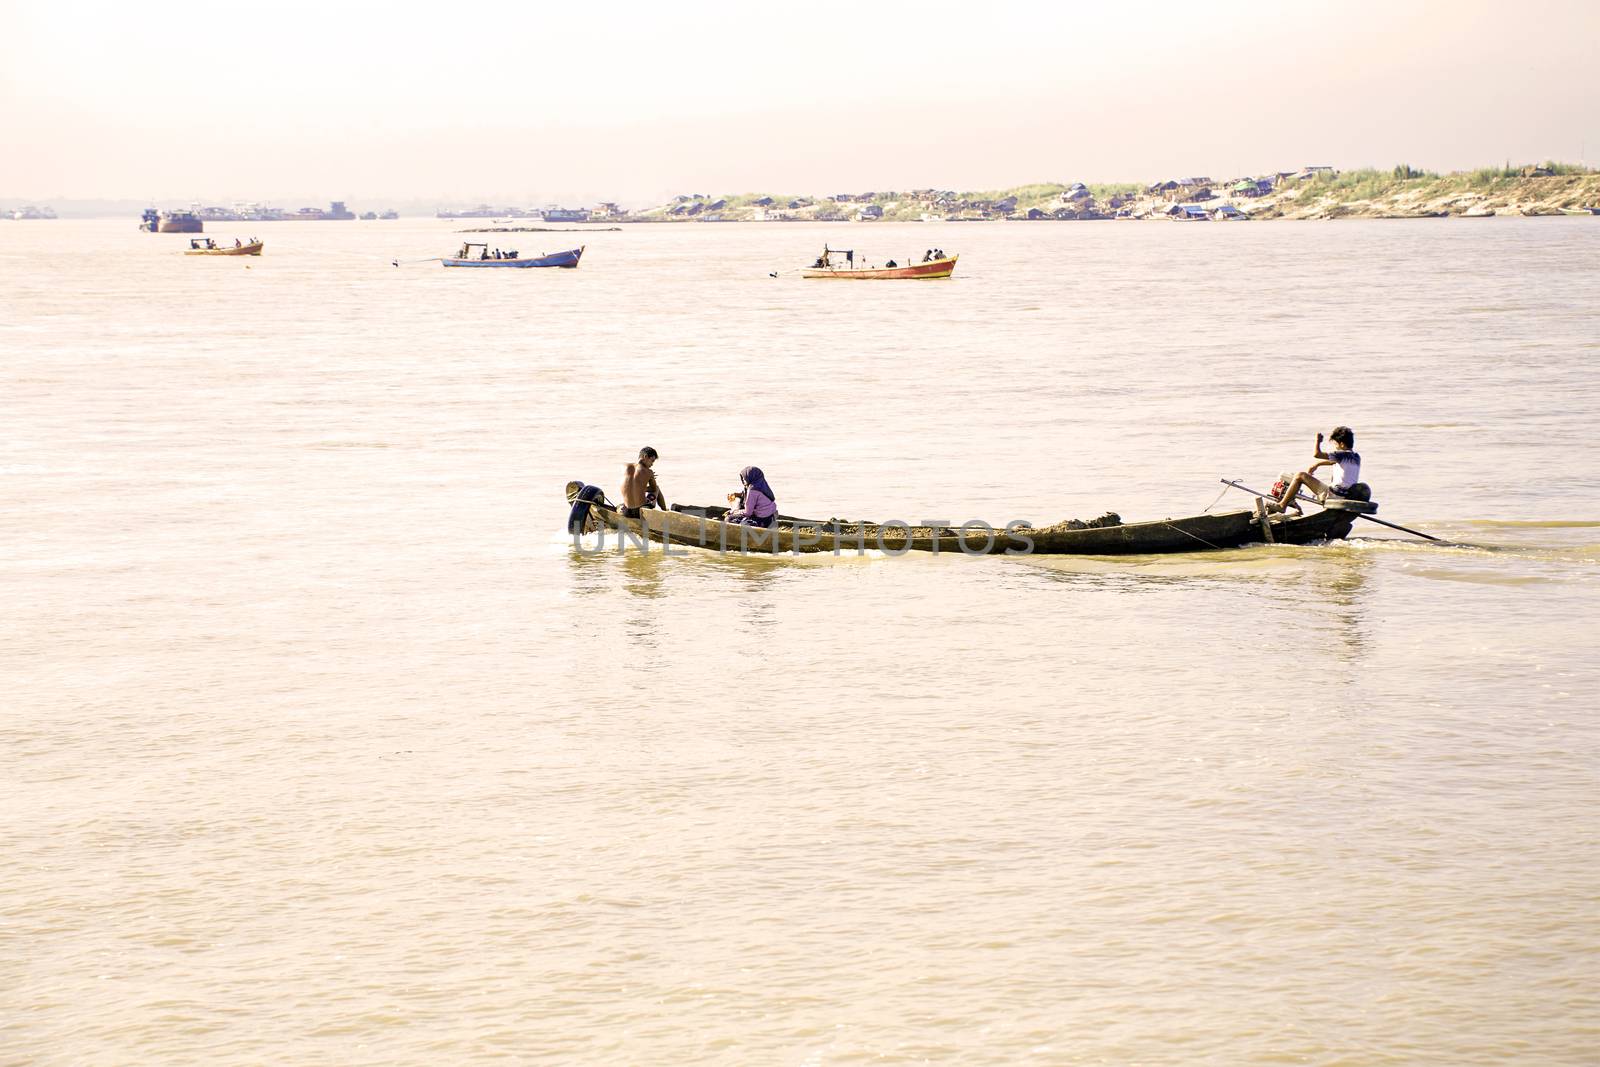 The Irrawaddy River or Ayeyarwady River is a river that flows from north to south through Myanmar. It is the country's largest river and most important commercial waterway.